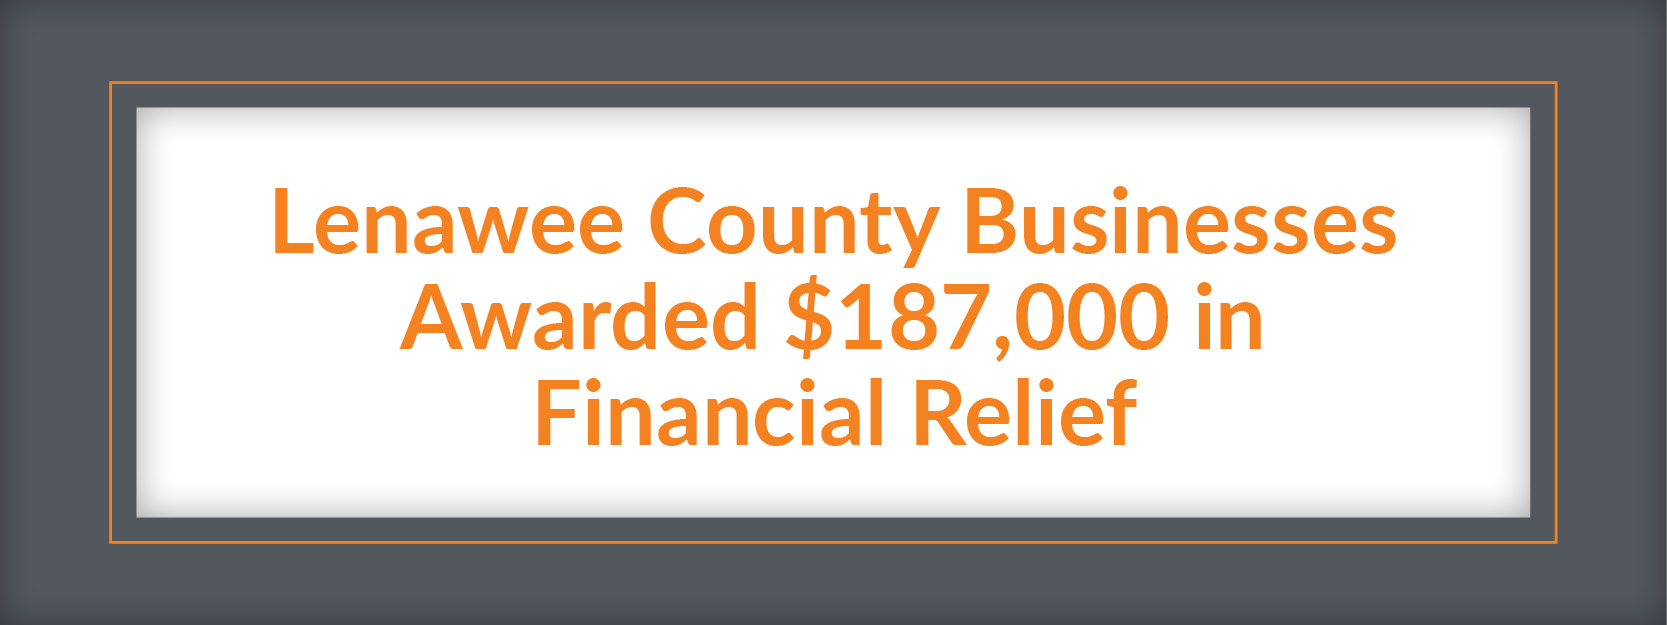 Small Business Relief Funds Awarded